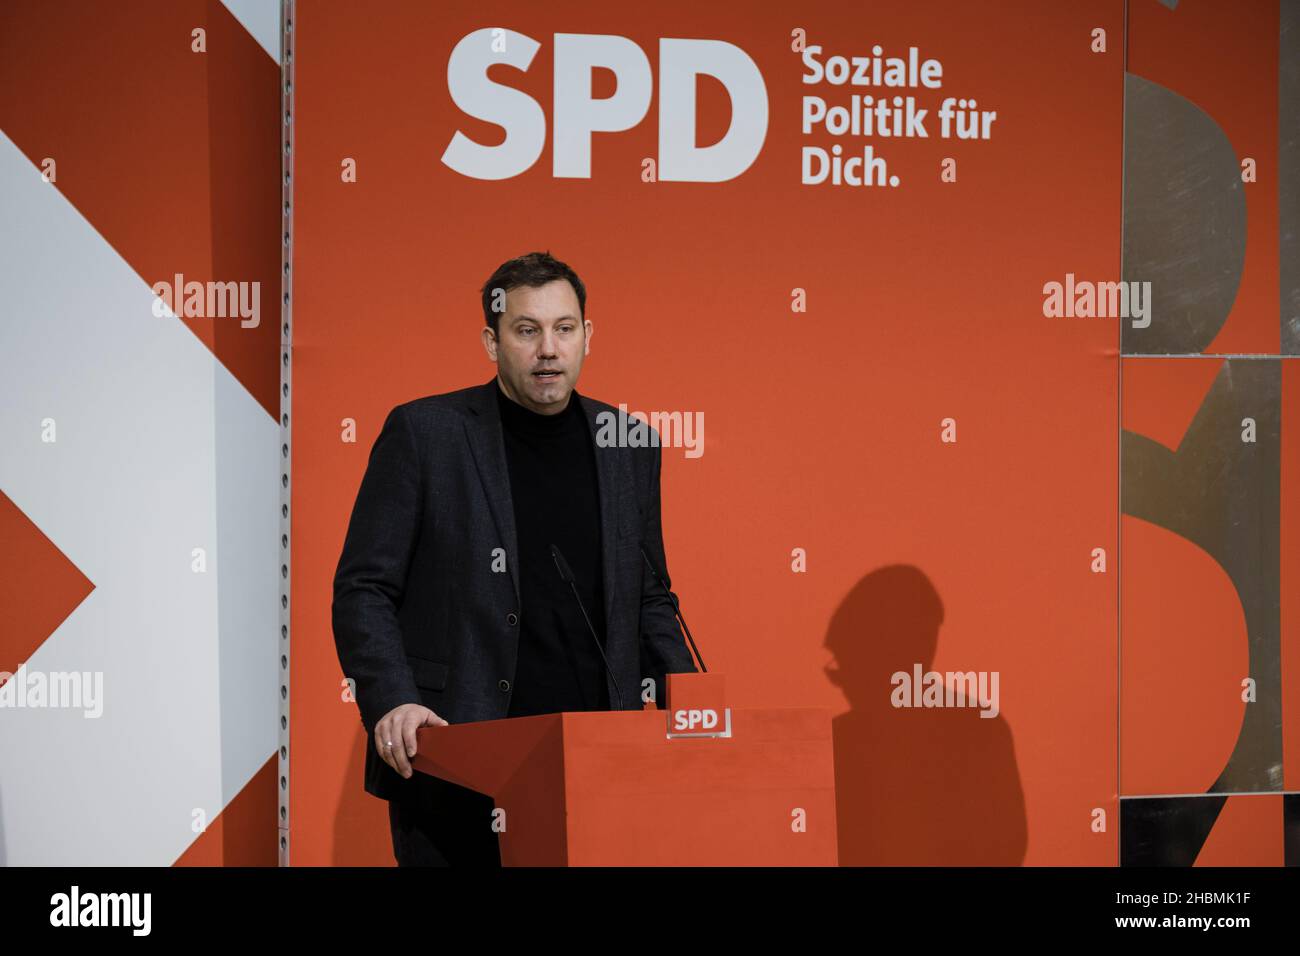 Berlin, Germany. 20th Dec, 2021. Lars Klingbeil at the press conference of the Social Democratic Party in Berlin on December 20, 2021. (Photo by Ralph Pache/PRESSCOV/Sipa USA) Credit: Sipa US/Alamy Live News Stock Photo